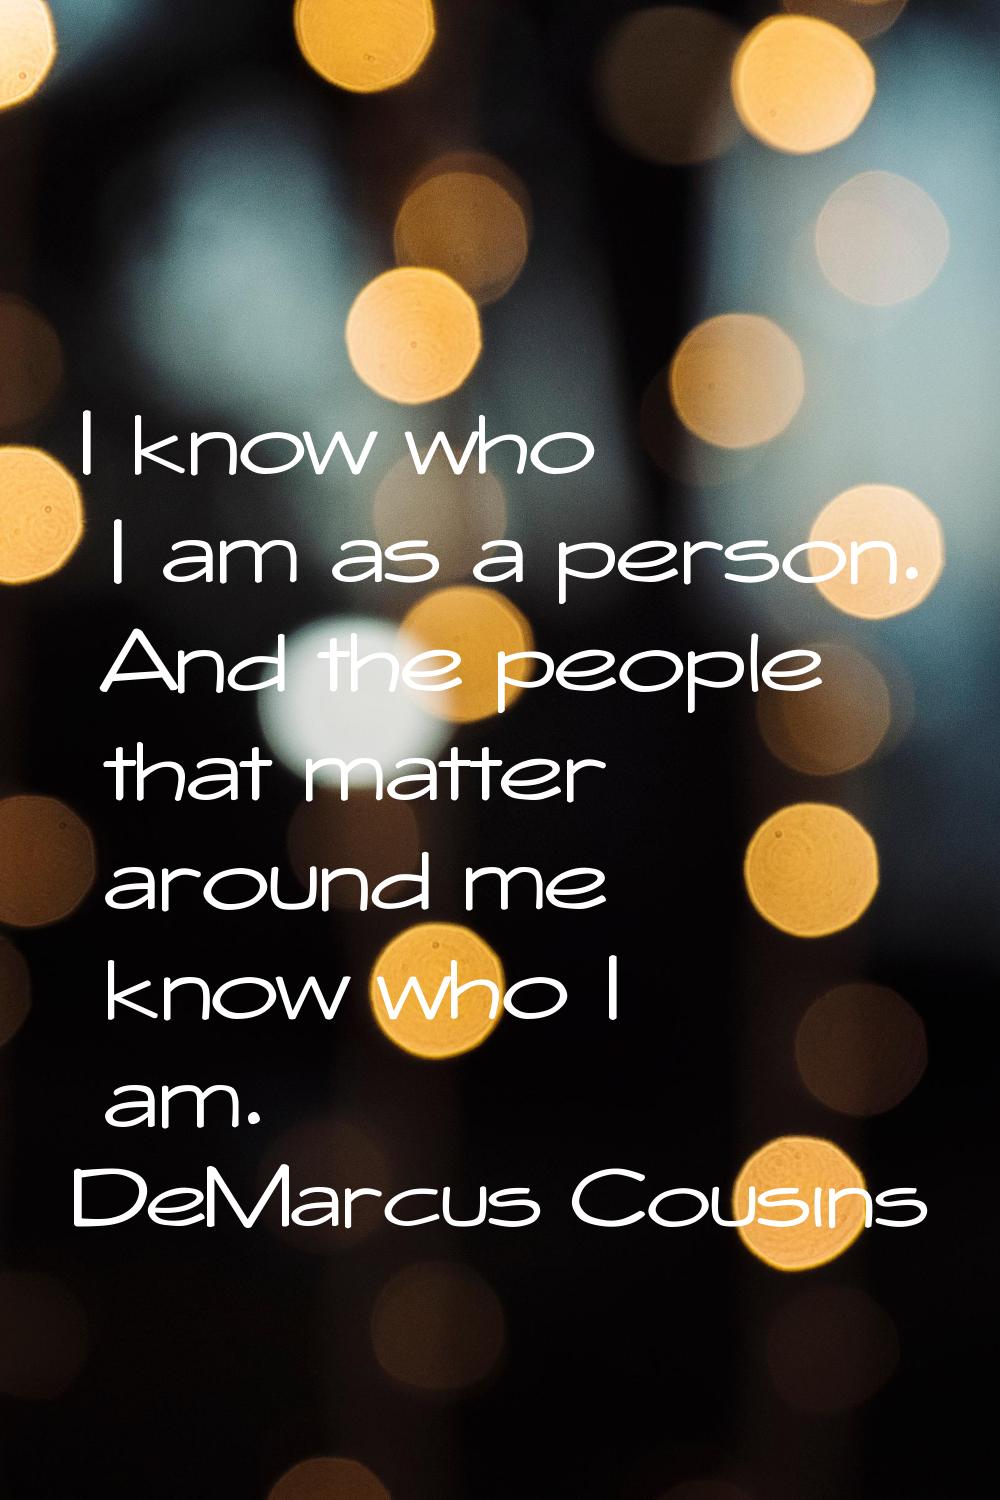 I know who I am as a person. And the people that matter around me know who I am.